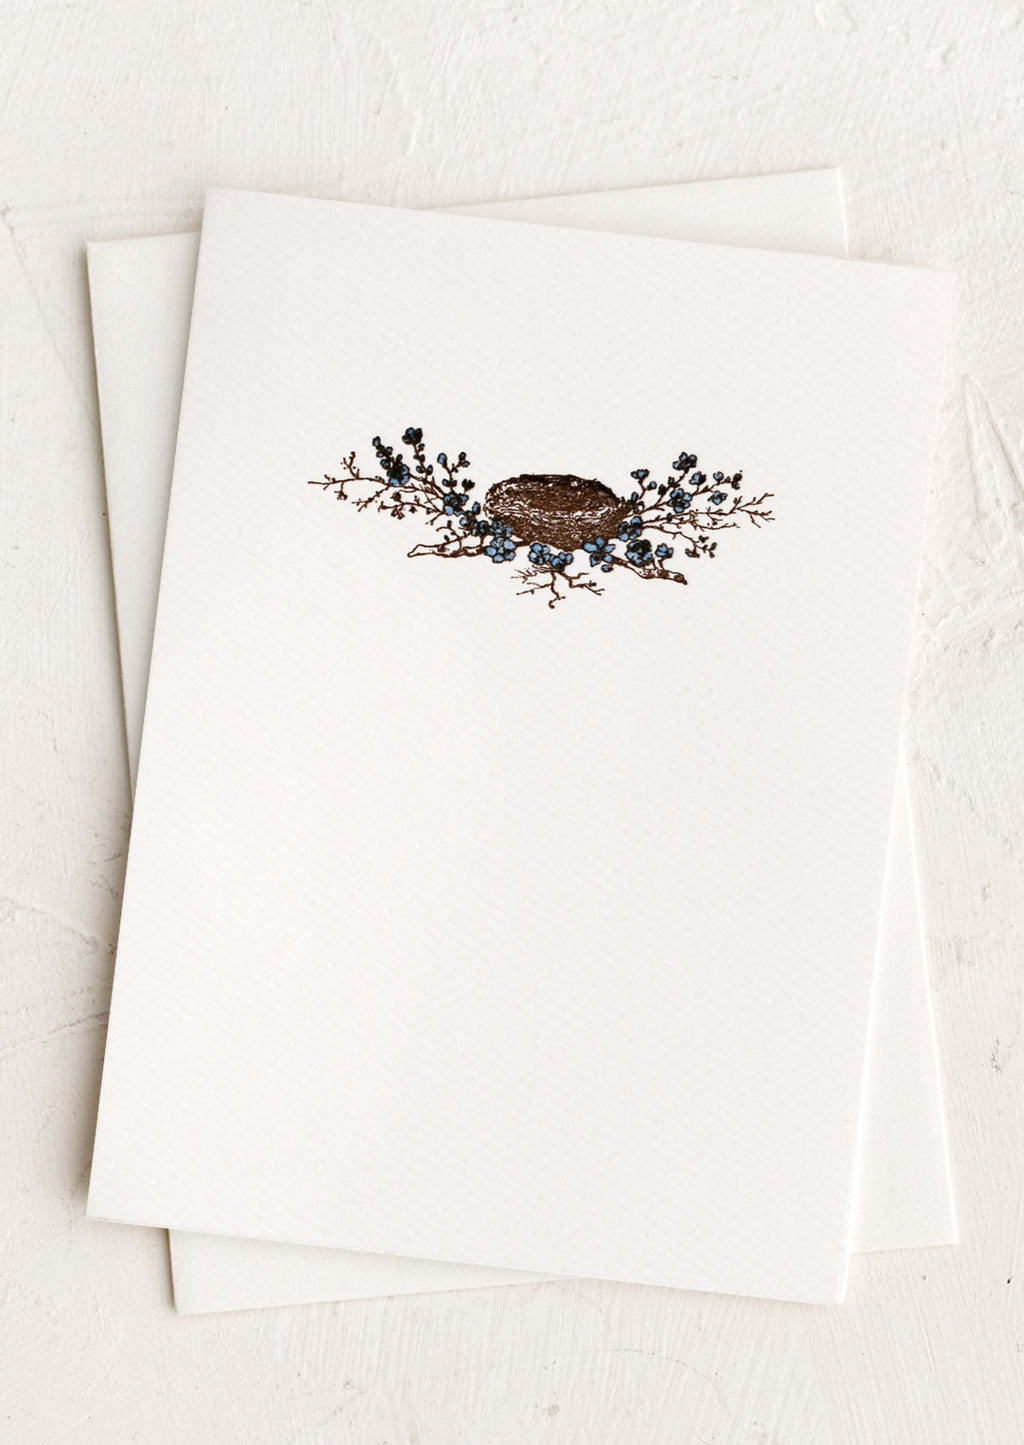 Birds Nest: A plain white card with small bird's nest design at front.